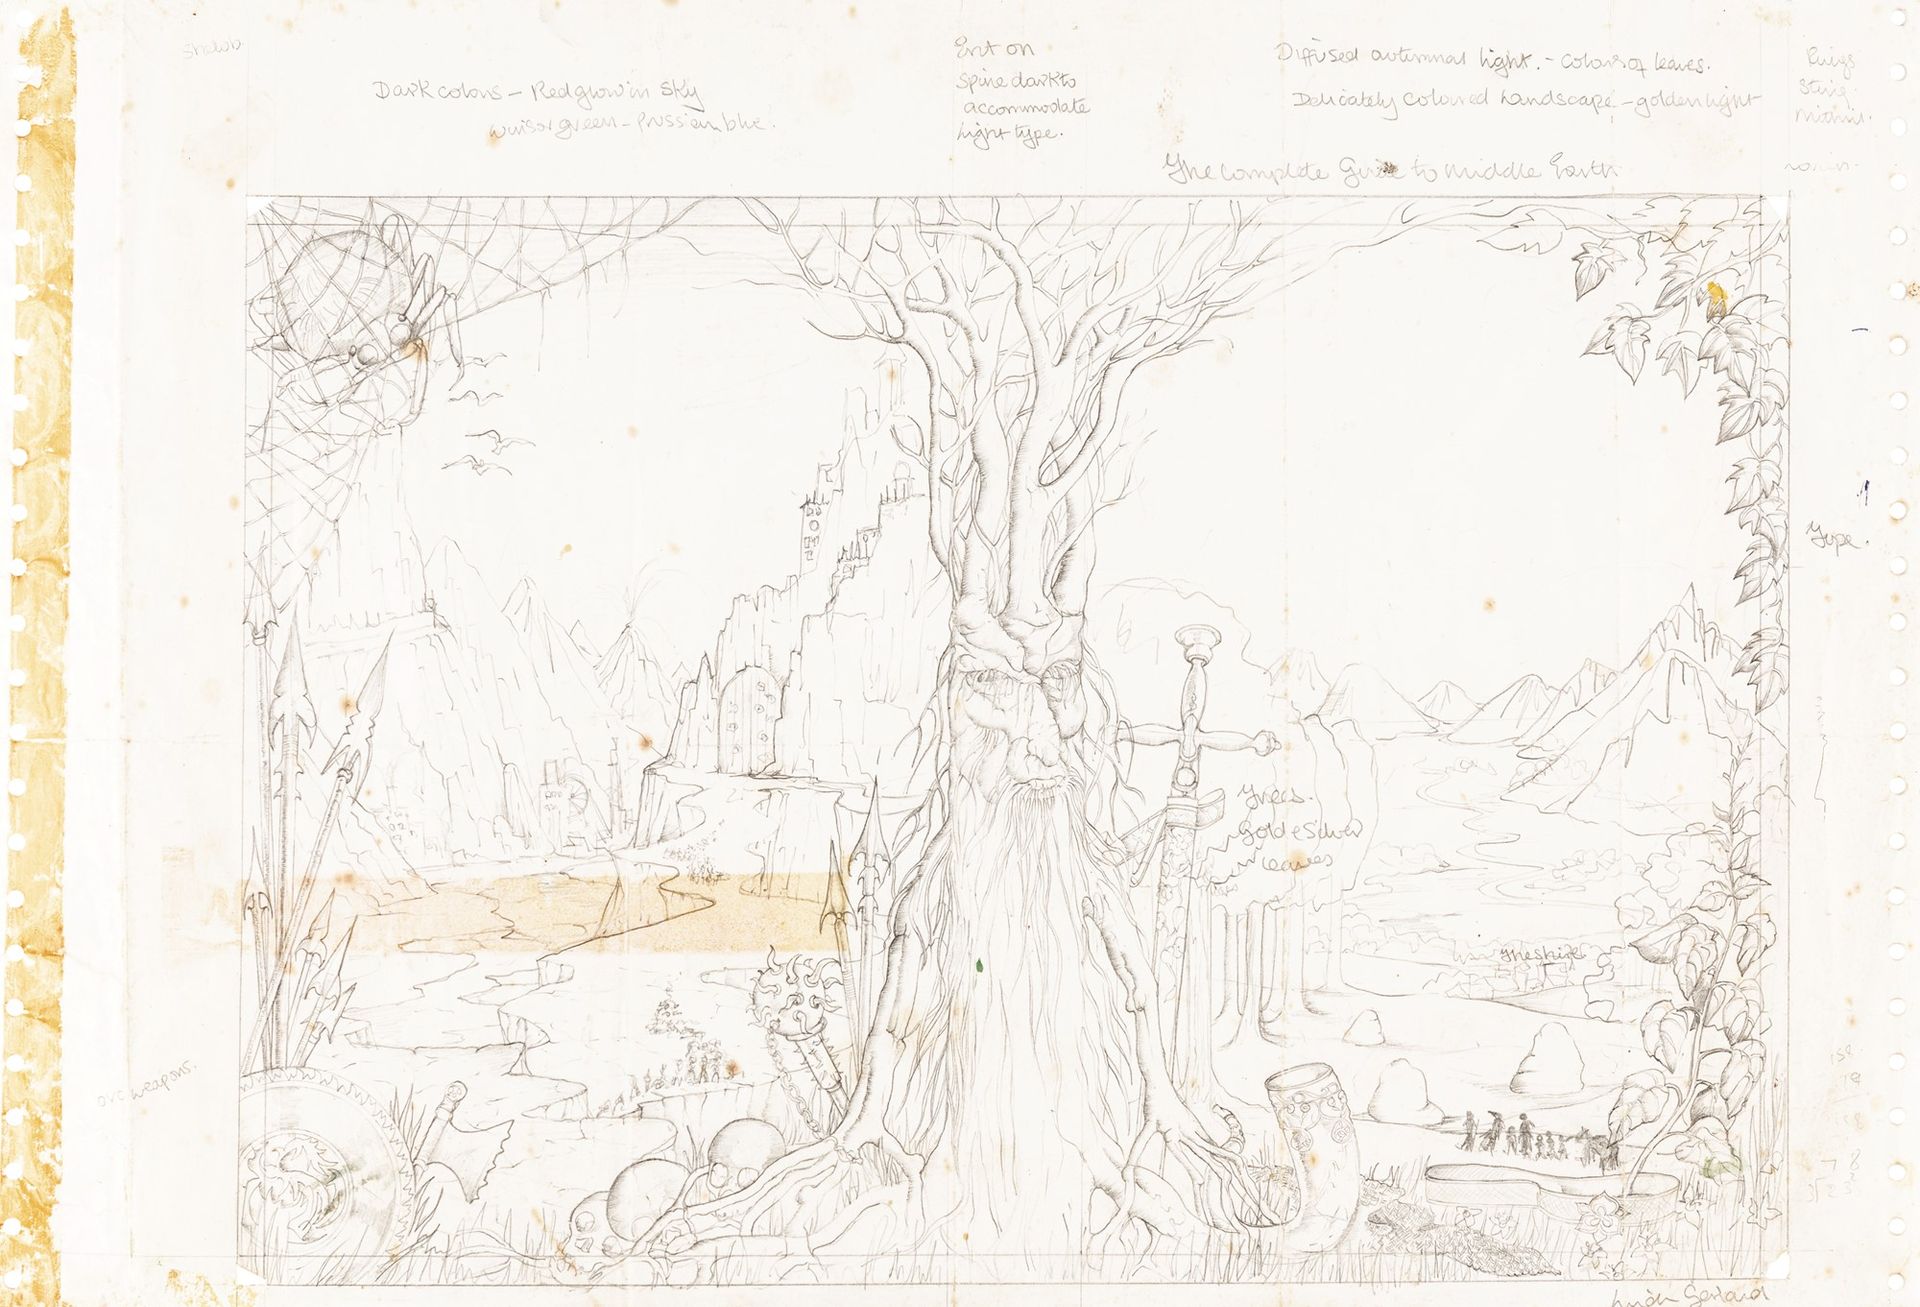 Linda Garland The Complete Guide to Middle-Earth, 1978

pencil on paper
45 x 30.&hellip;